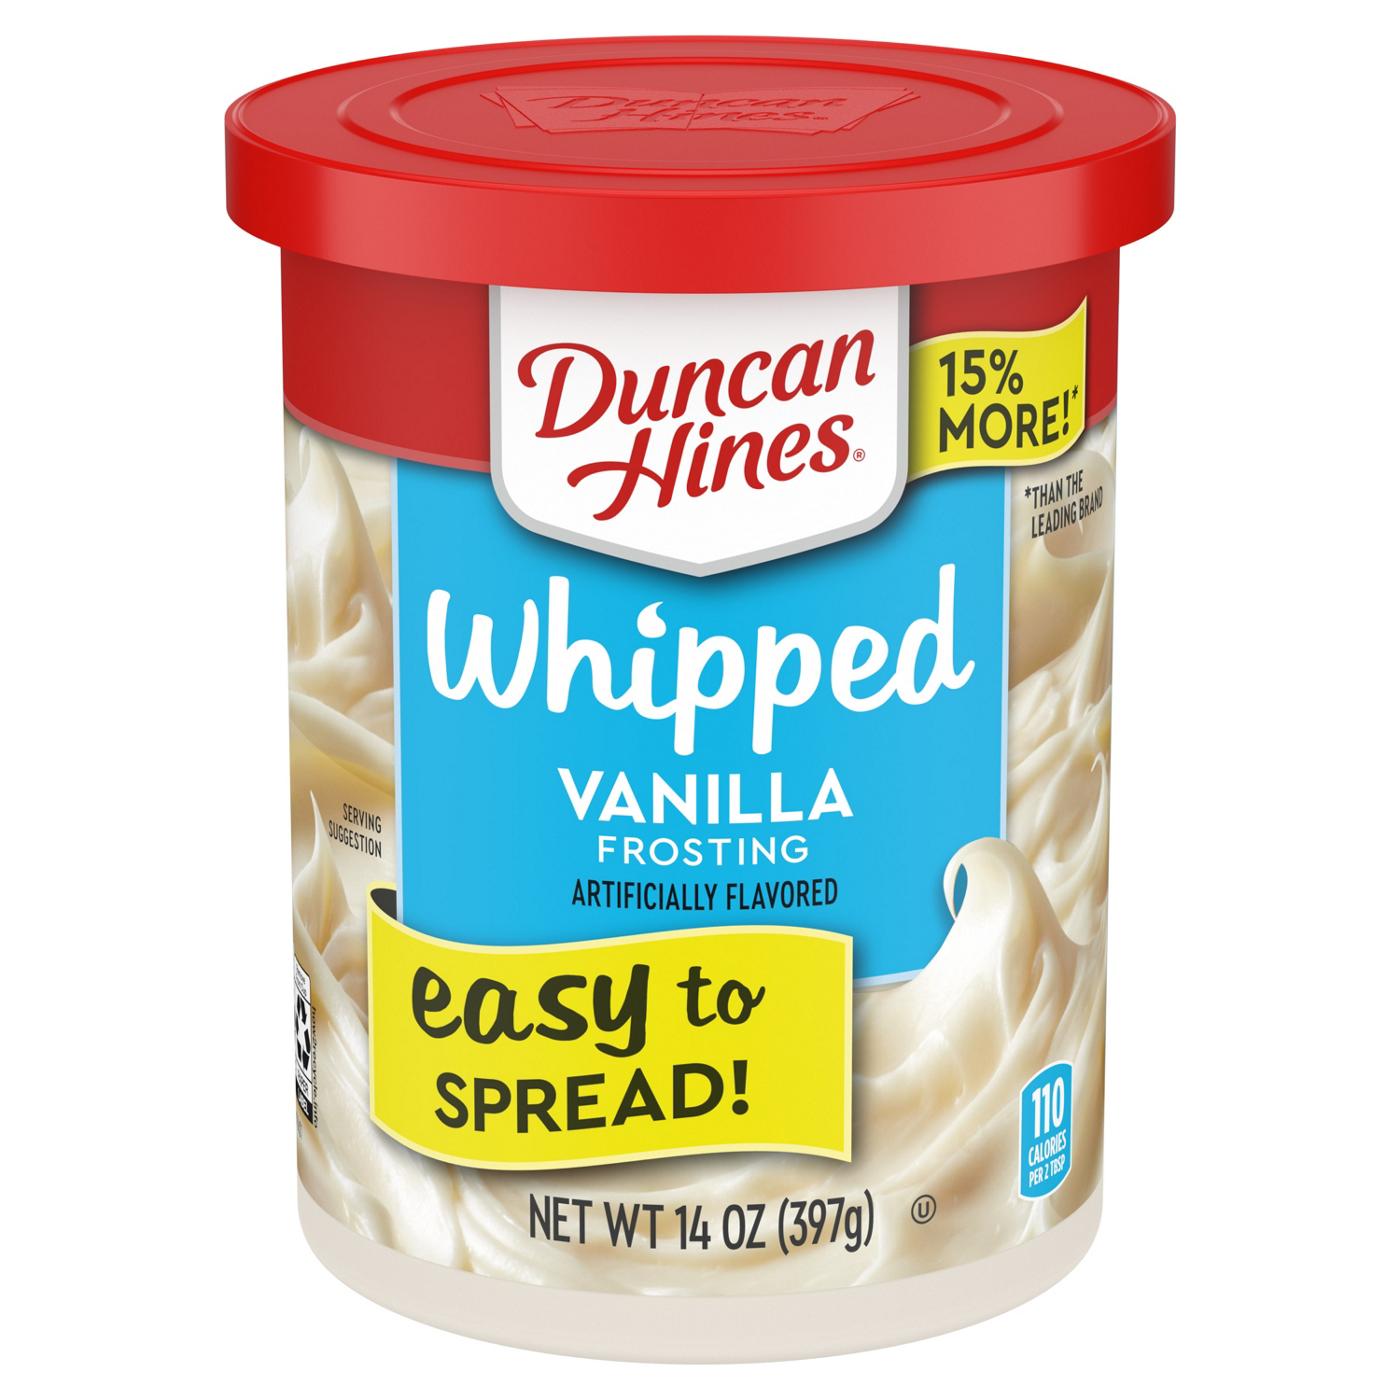 Duncan Hines Whipped Vanilla Frosting; image 1 of 7